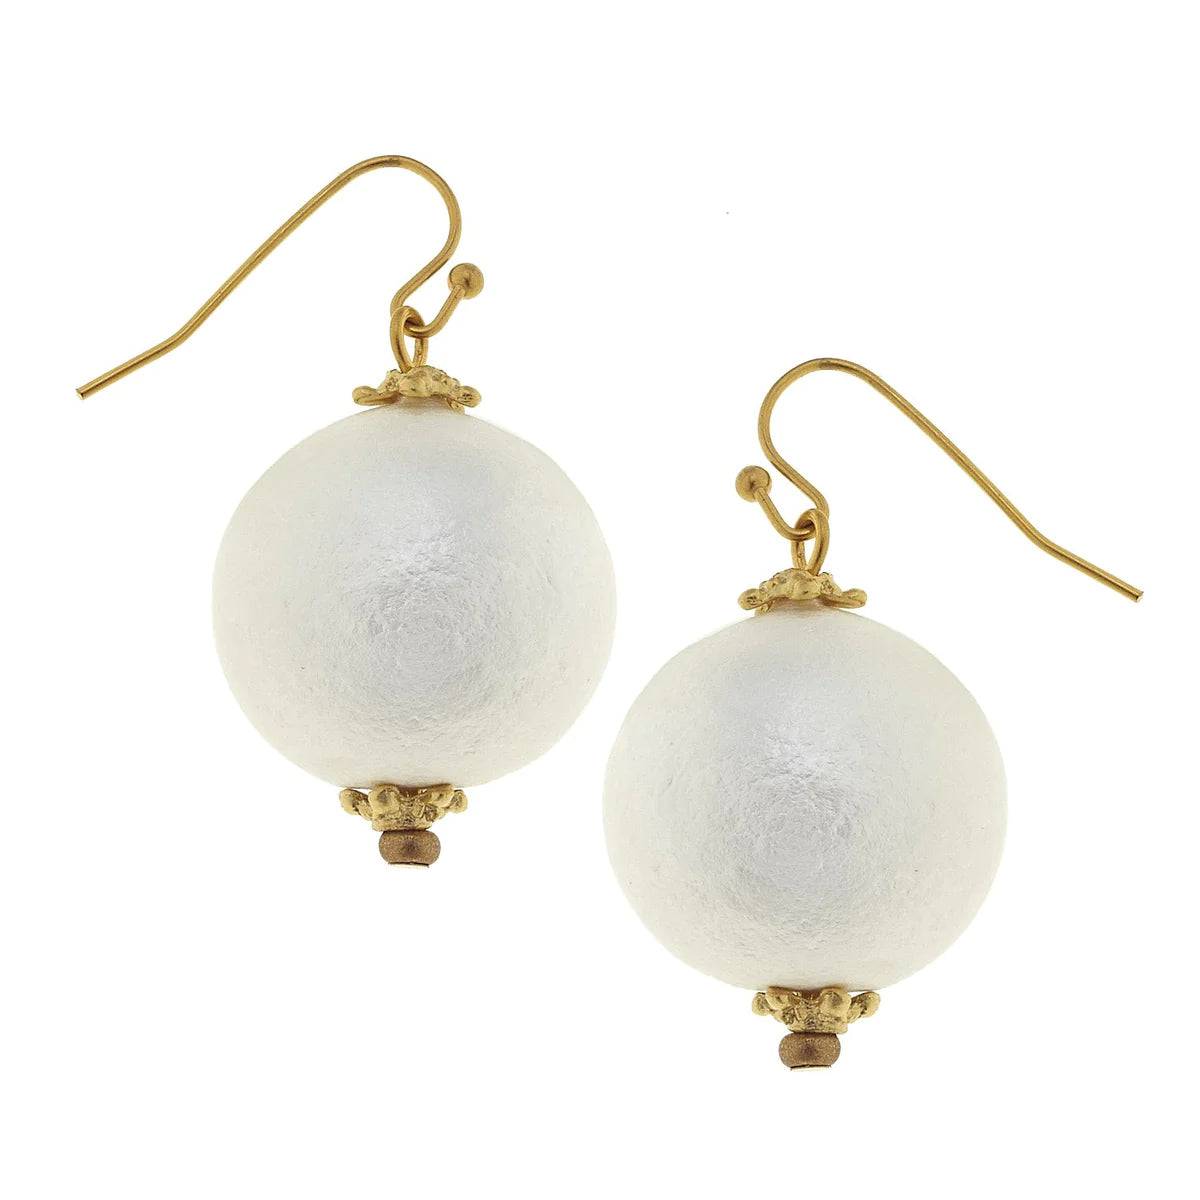 Susan Shaw White Cotton Pearl Earrings - GOLD - Findlay Rowe Designs